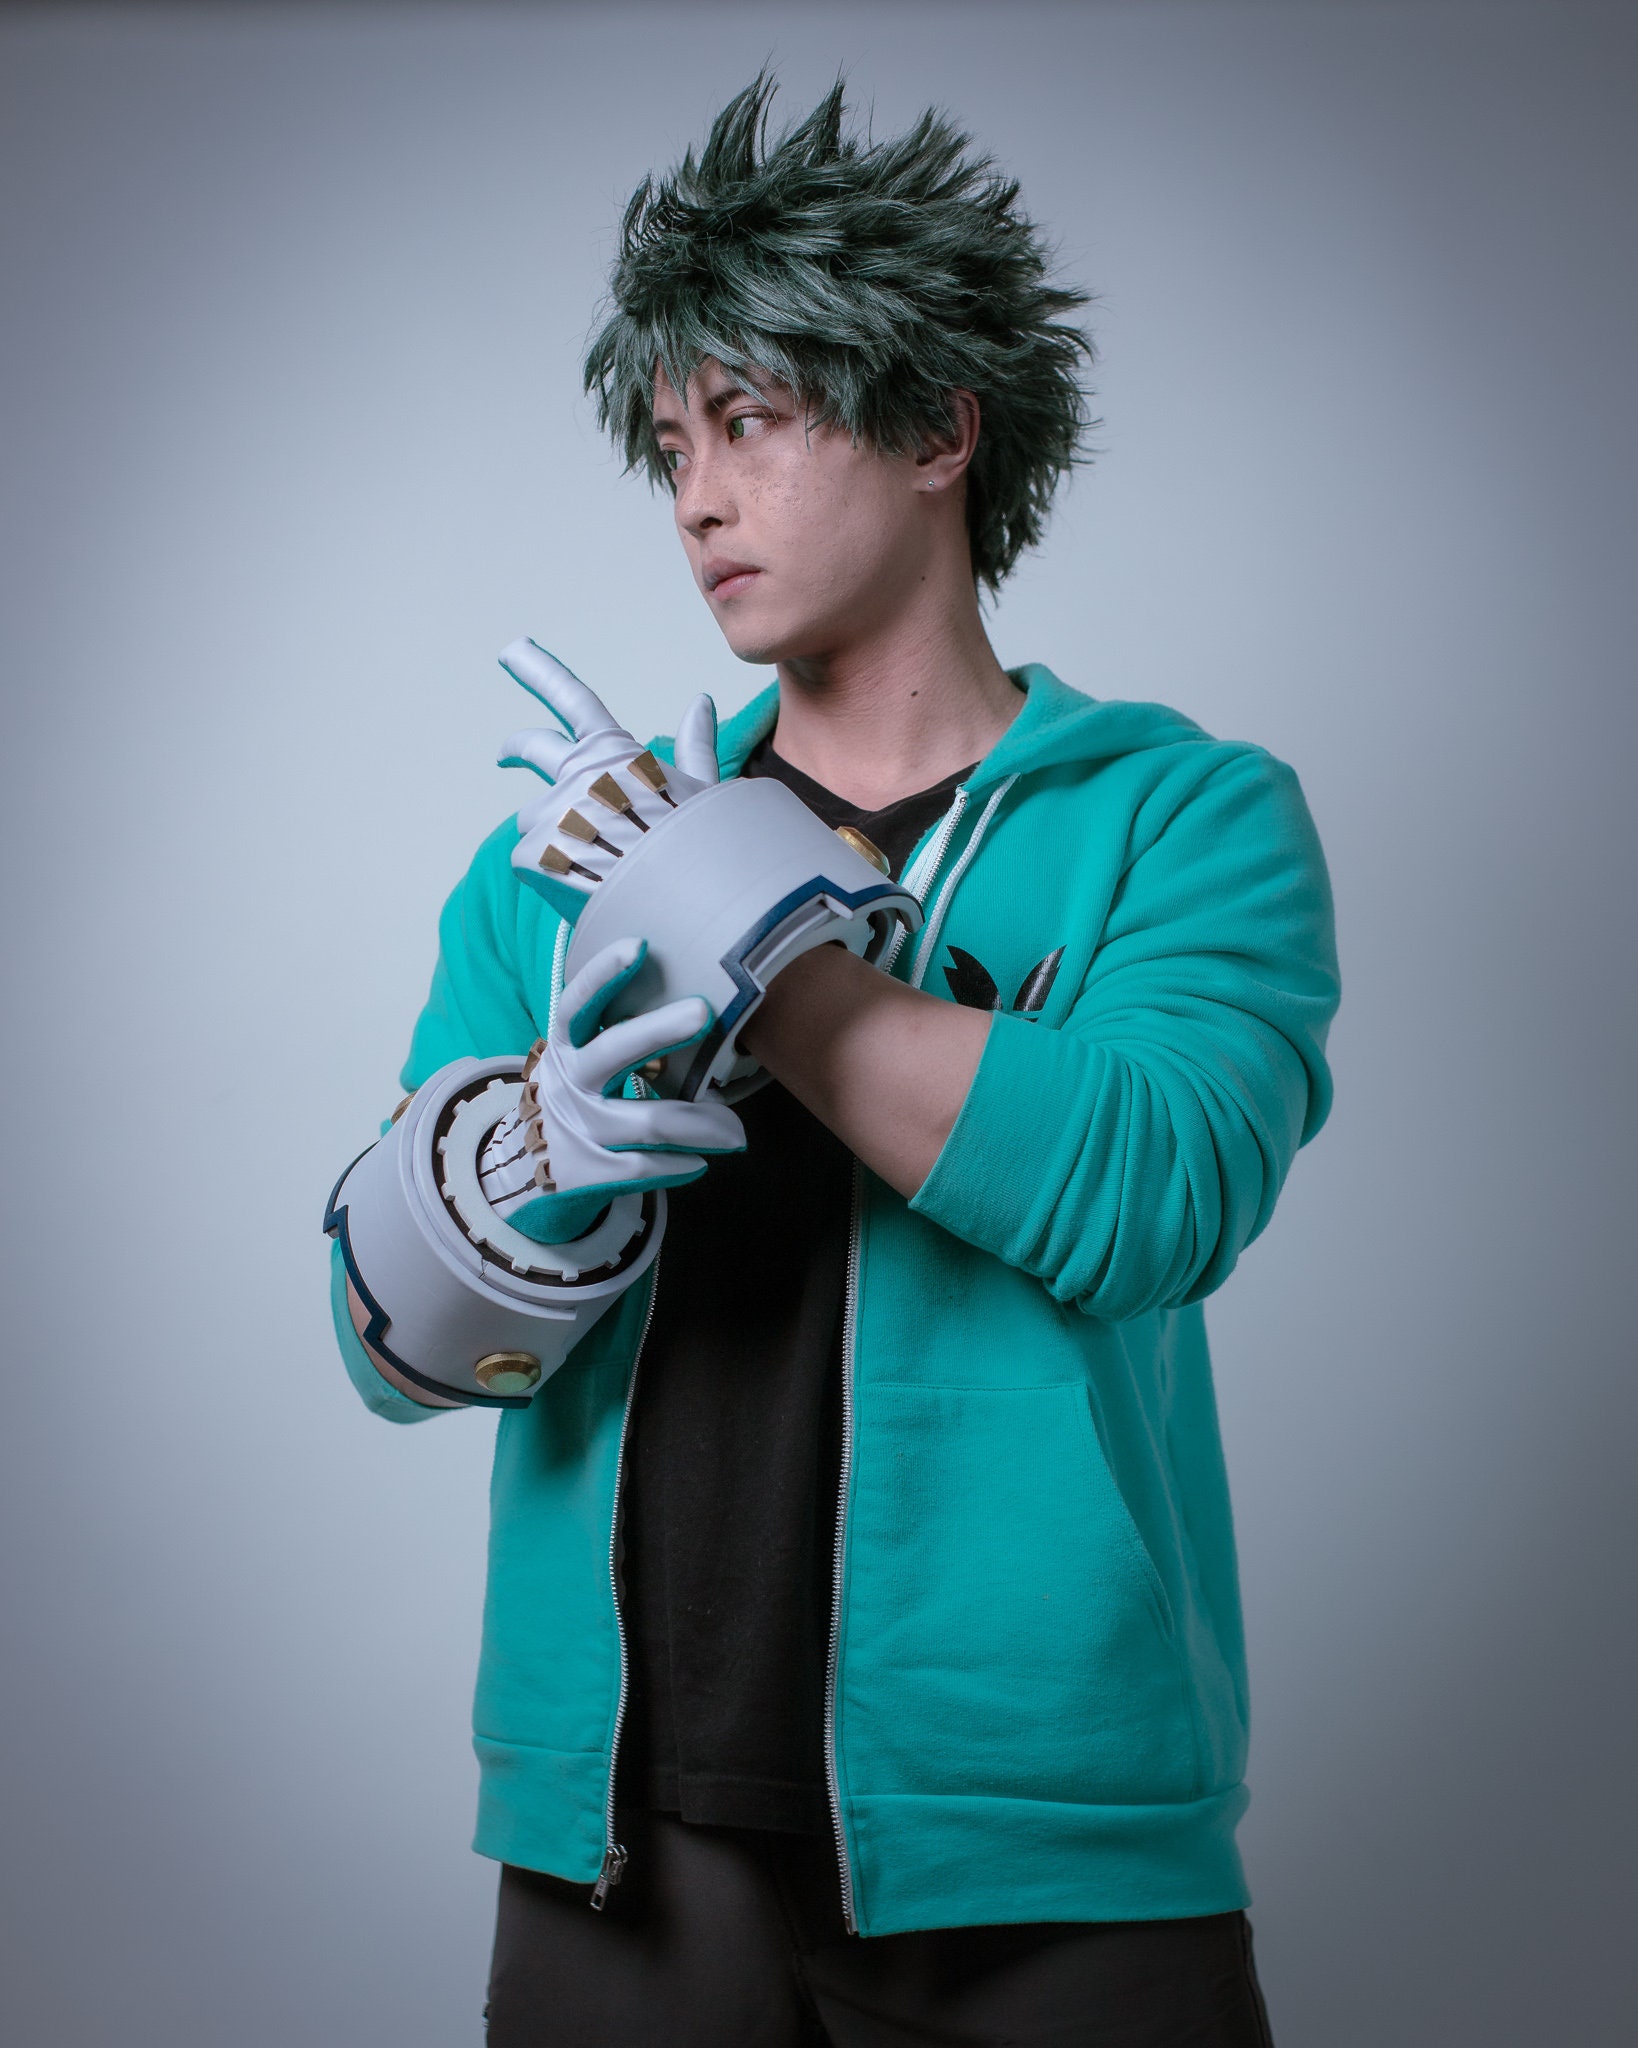 Deku Airforce Glove Cosplay Pattern Template and 3D File // | Etsy